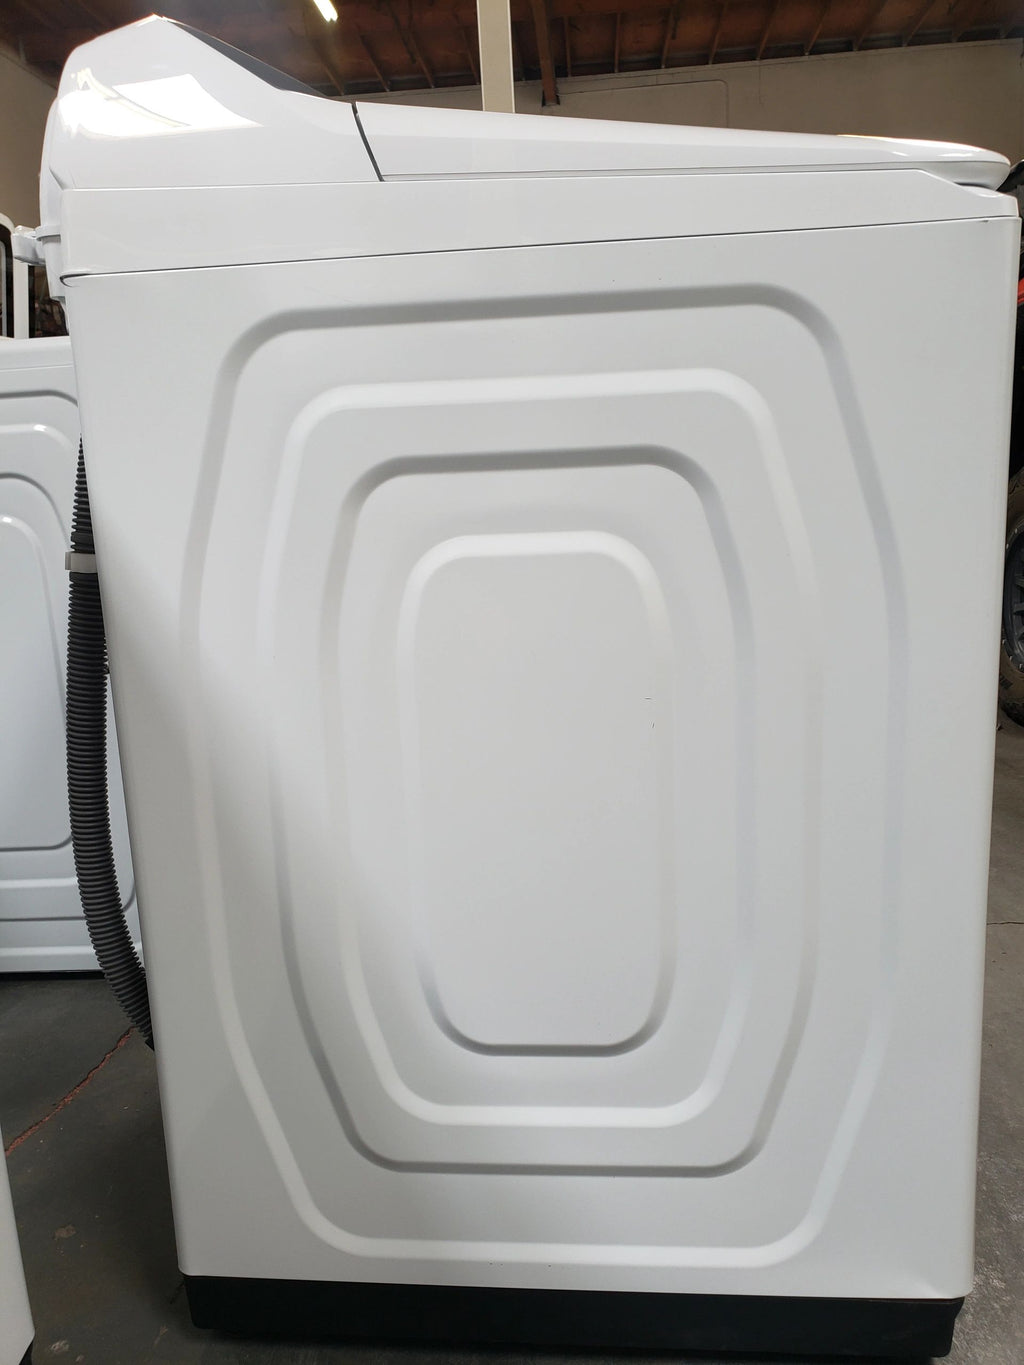 NEW Dent & Scratch. 5.0 cu. ft. Hi-Efficiency White Top Load Washing Machine with Active Water Jet, ENERGY STAR. Model: WA50R5200AW